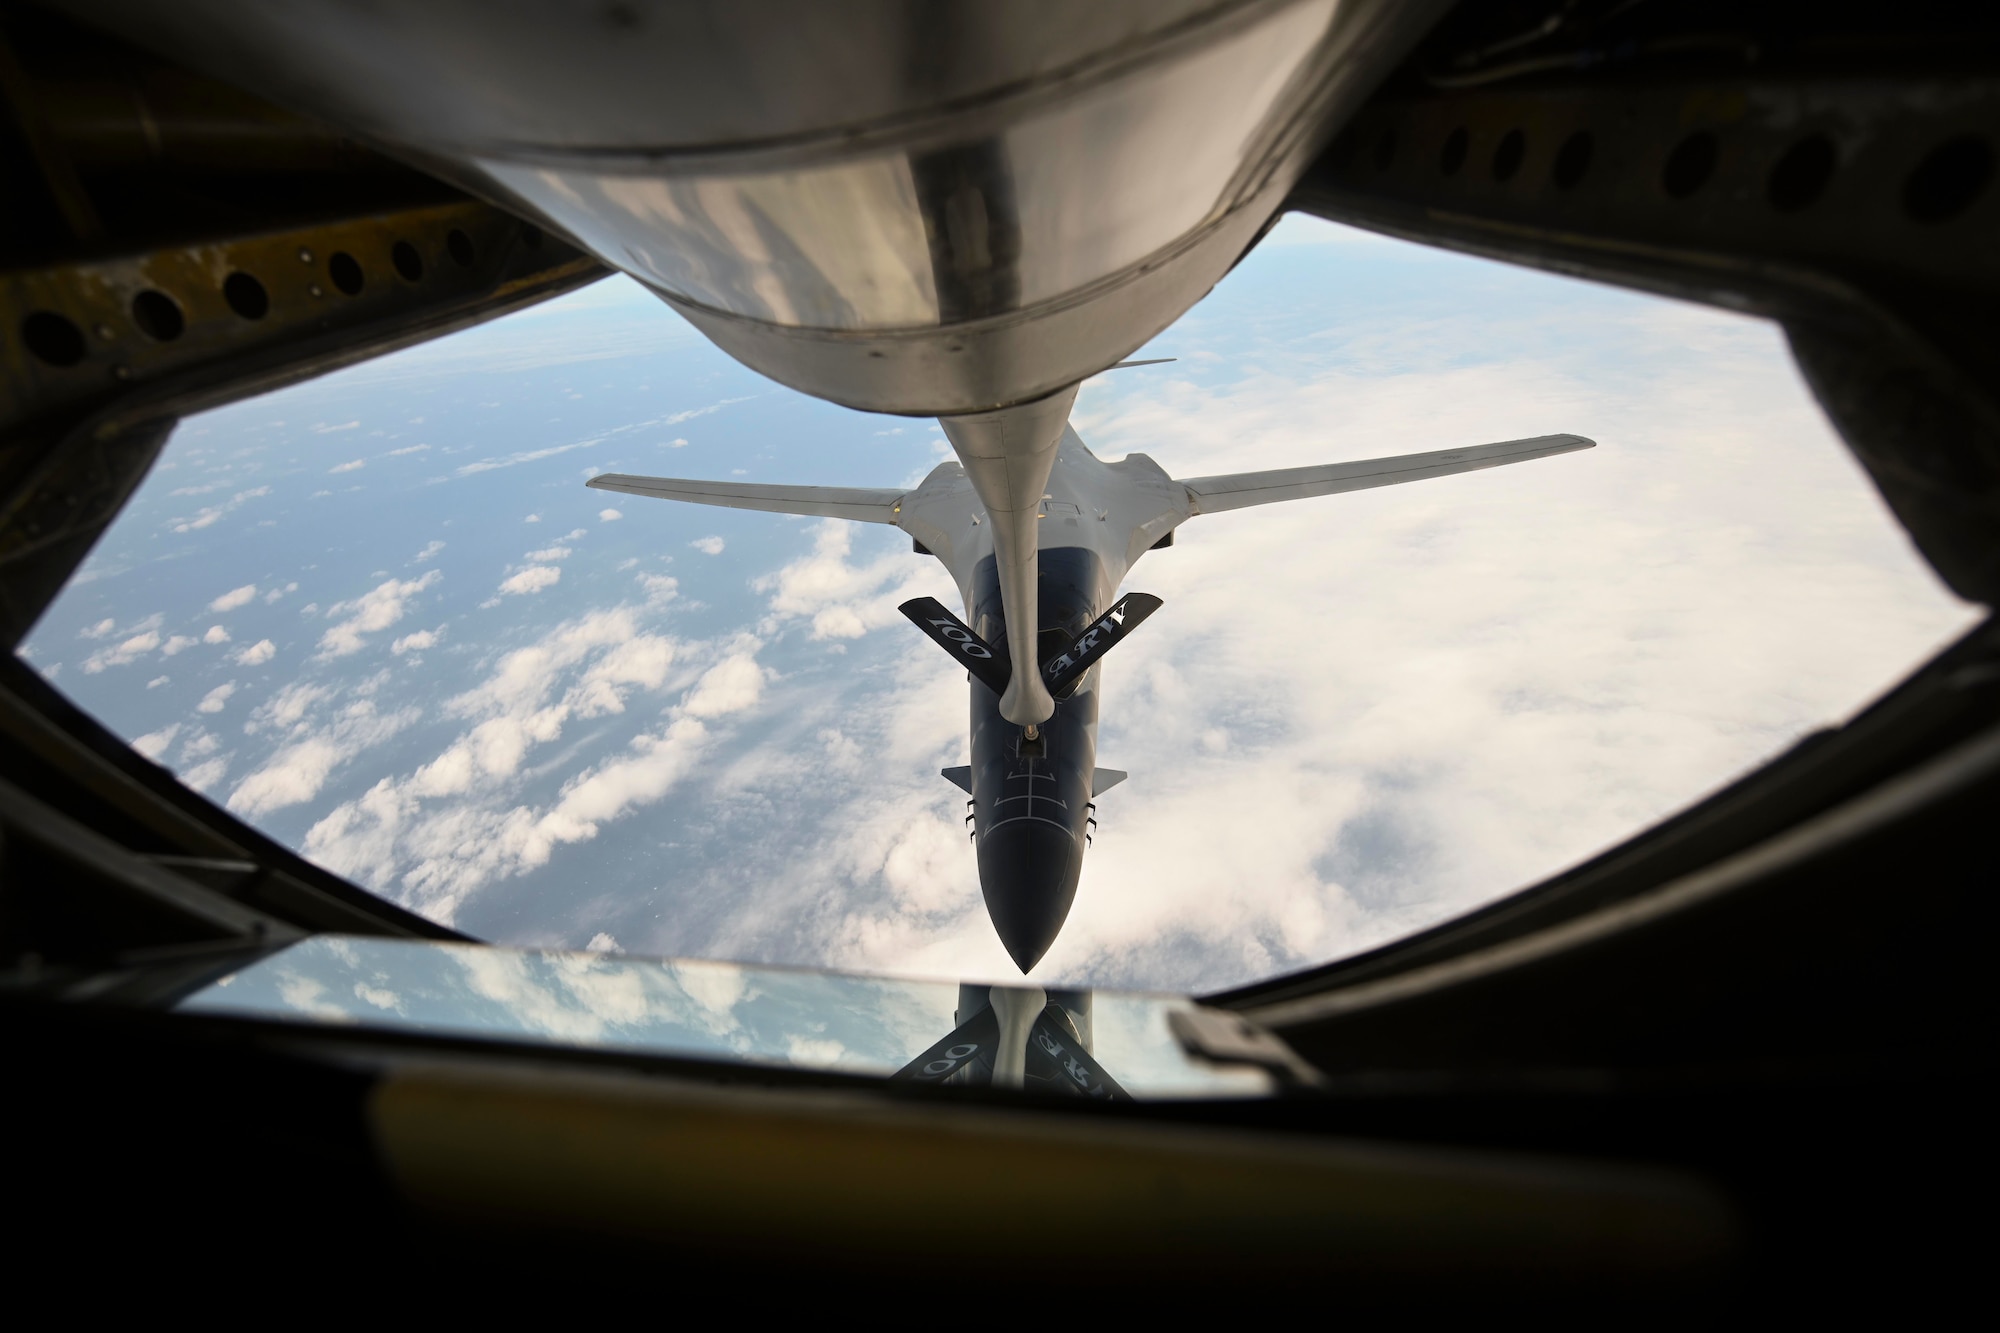 A U.S. Air Force B-1B Lancer aircraft assigned to the 28th Bomb Wing receives fuel from a KC-135 Stratotanker aircraft assigned to the 100th Air Refueling Wing during a Bomber Task Force mission over the Mediterranean Sea, April 7, 2021. The U.S. routinely and visibly demonstrates commitment to allies and partners through the global employment of its military forces. (U.S. Air Force photo by Senior Airman Joseph Barron)